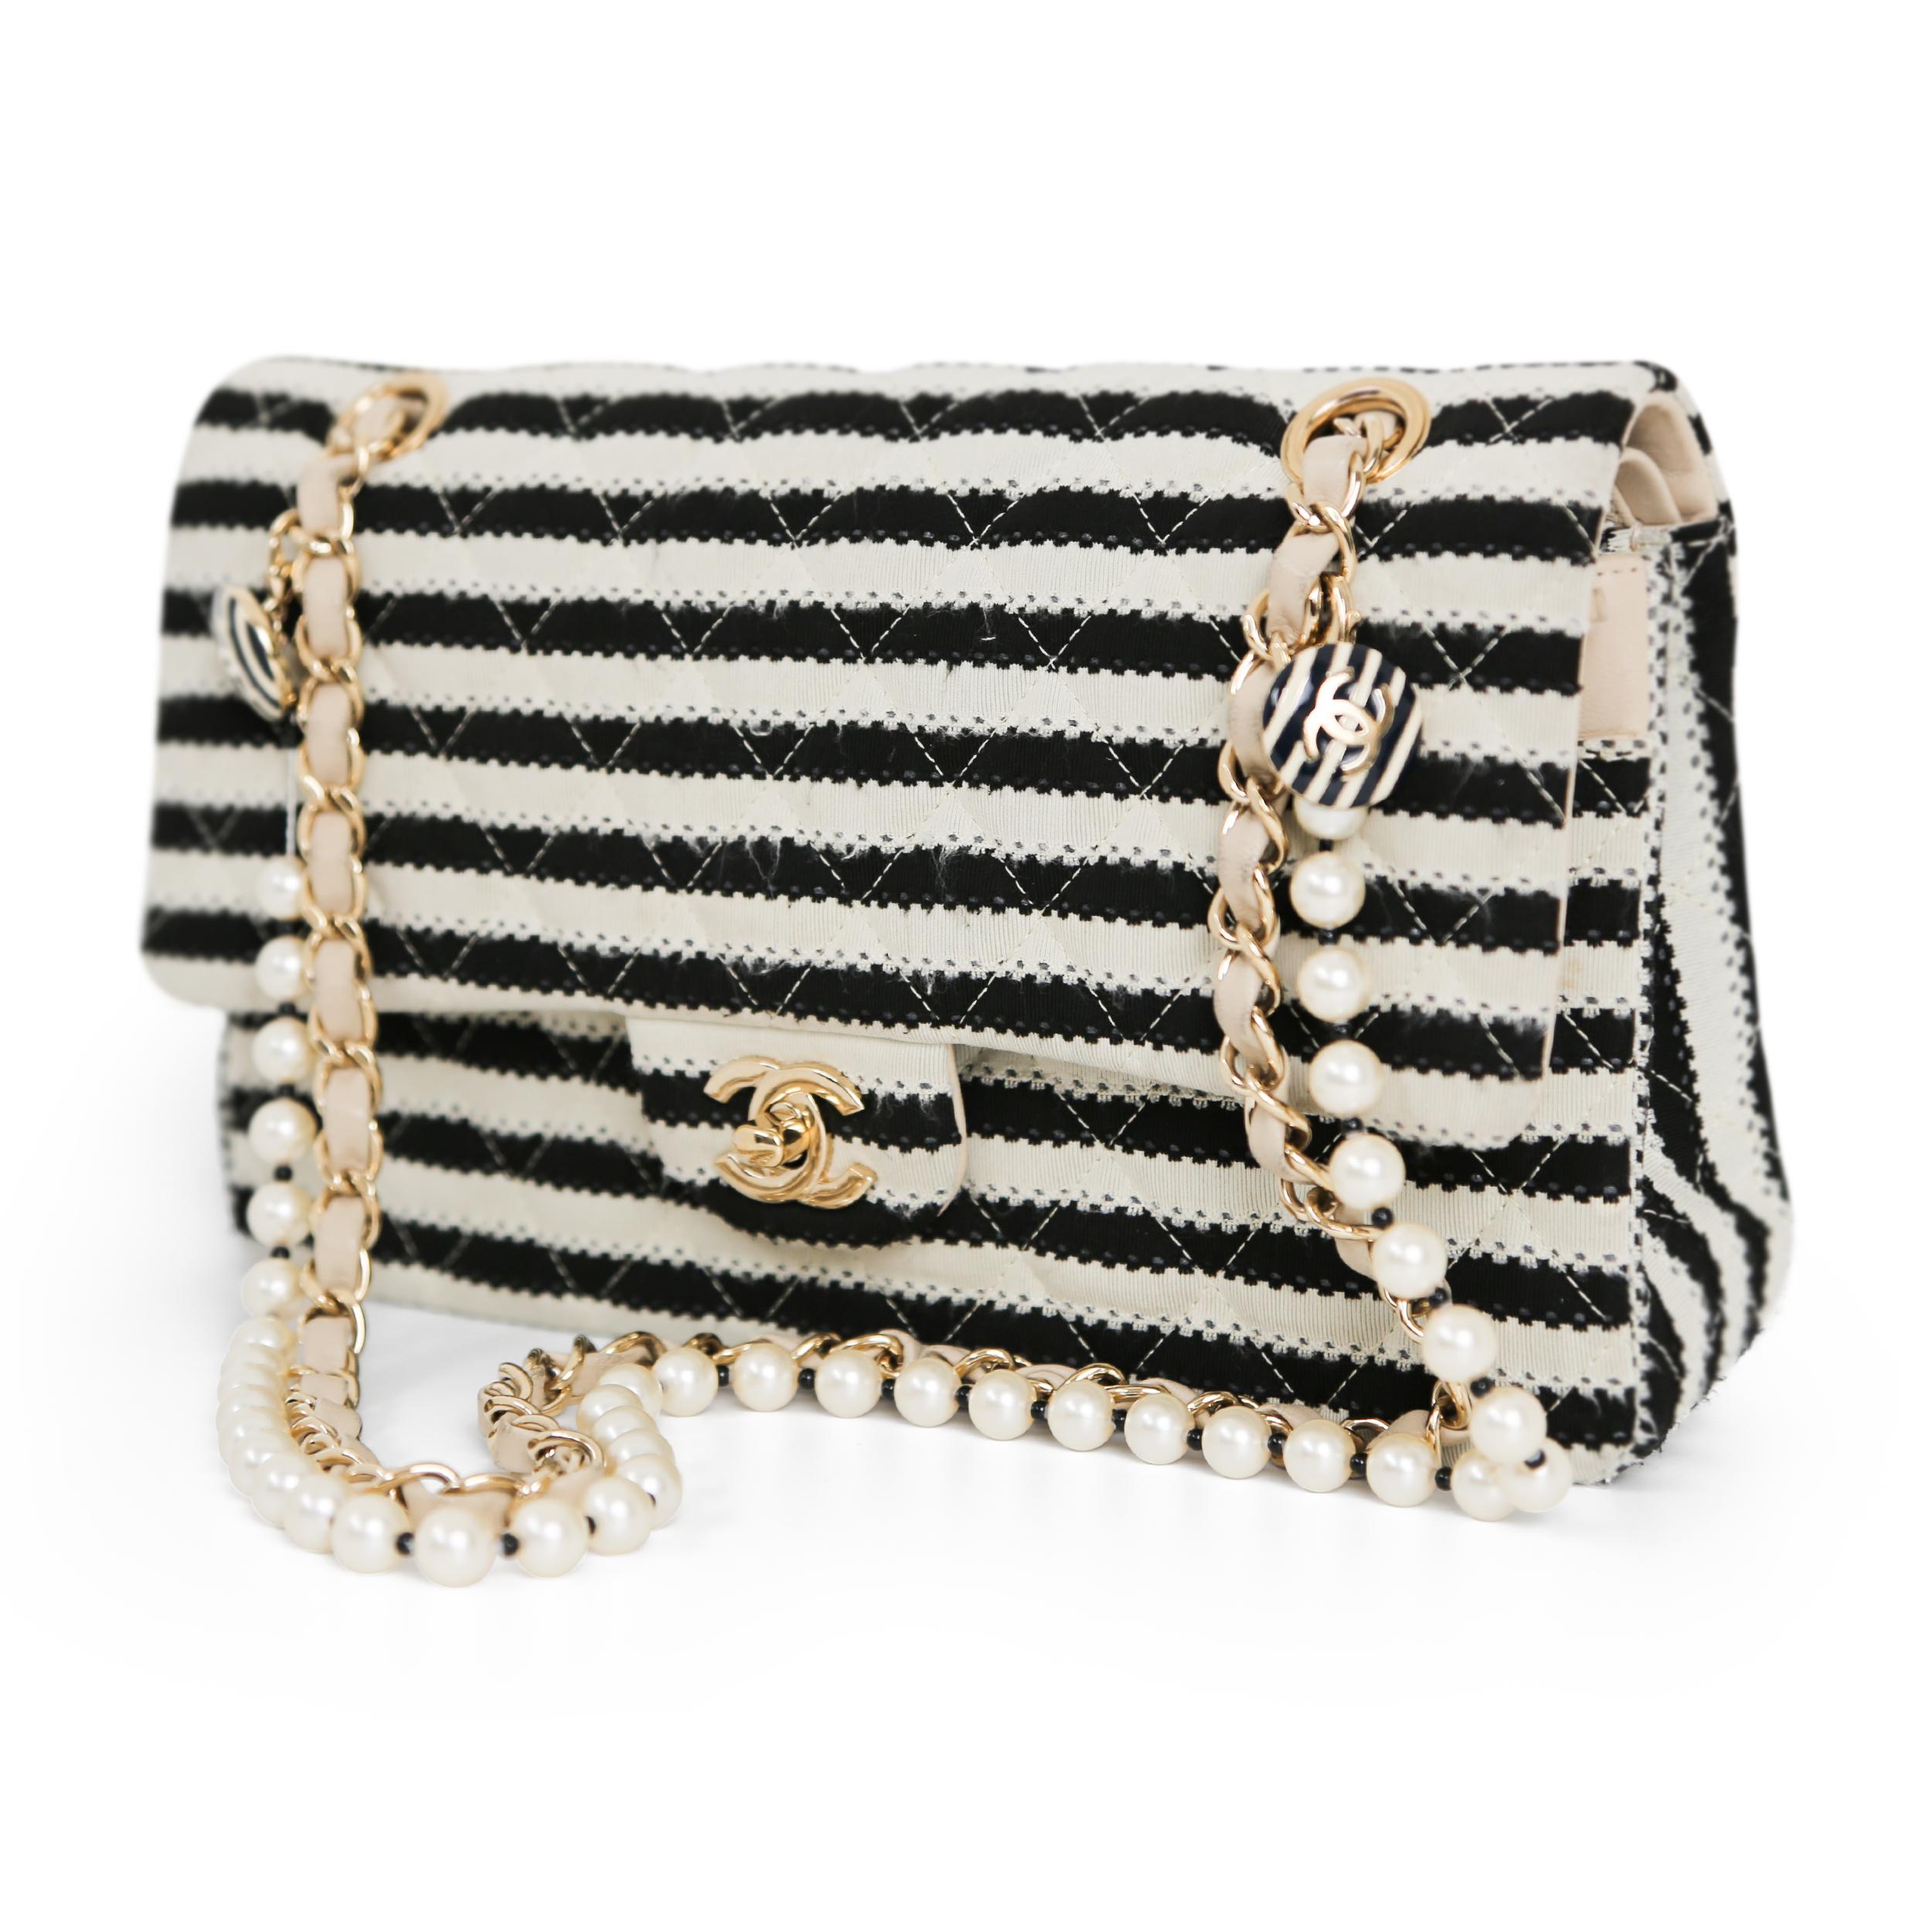 The Coco Sailor Classic Flap Bag by Chanel is a must-have. This limited-edition 2014 design boasts a modern twist on the classic flap bag. The exterior is constructed with high-quality cloth, while the interior is lined with luxurious leather. The